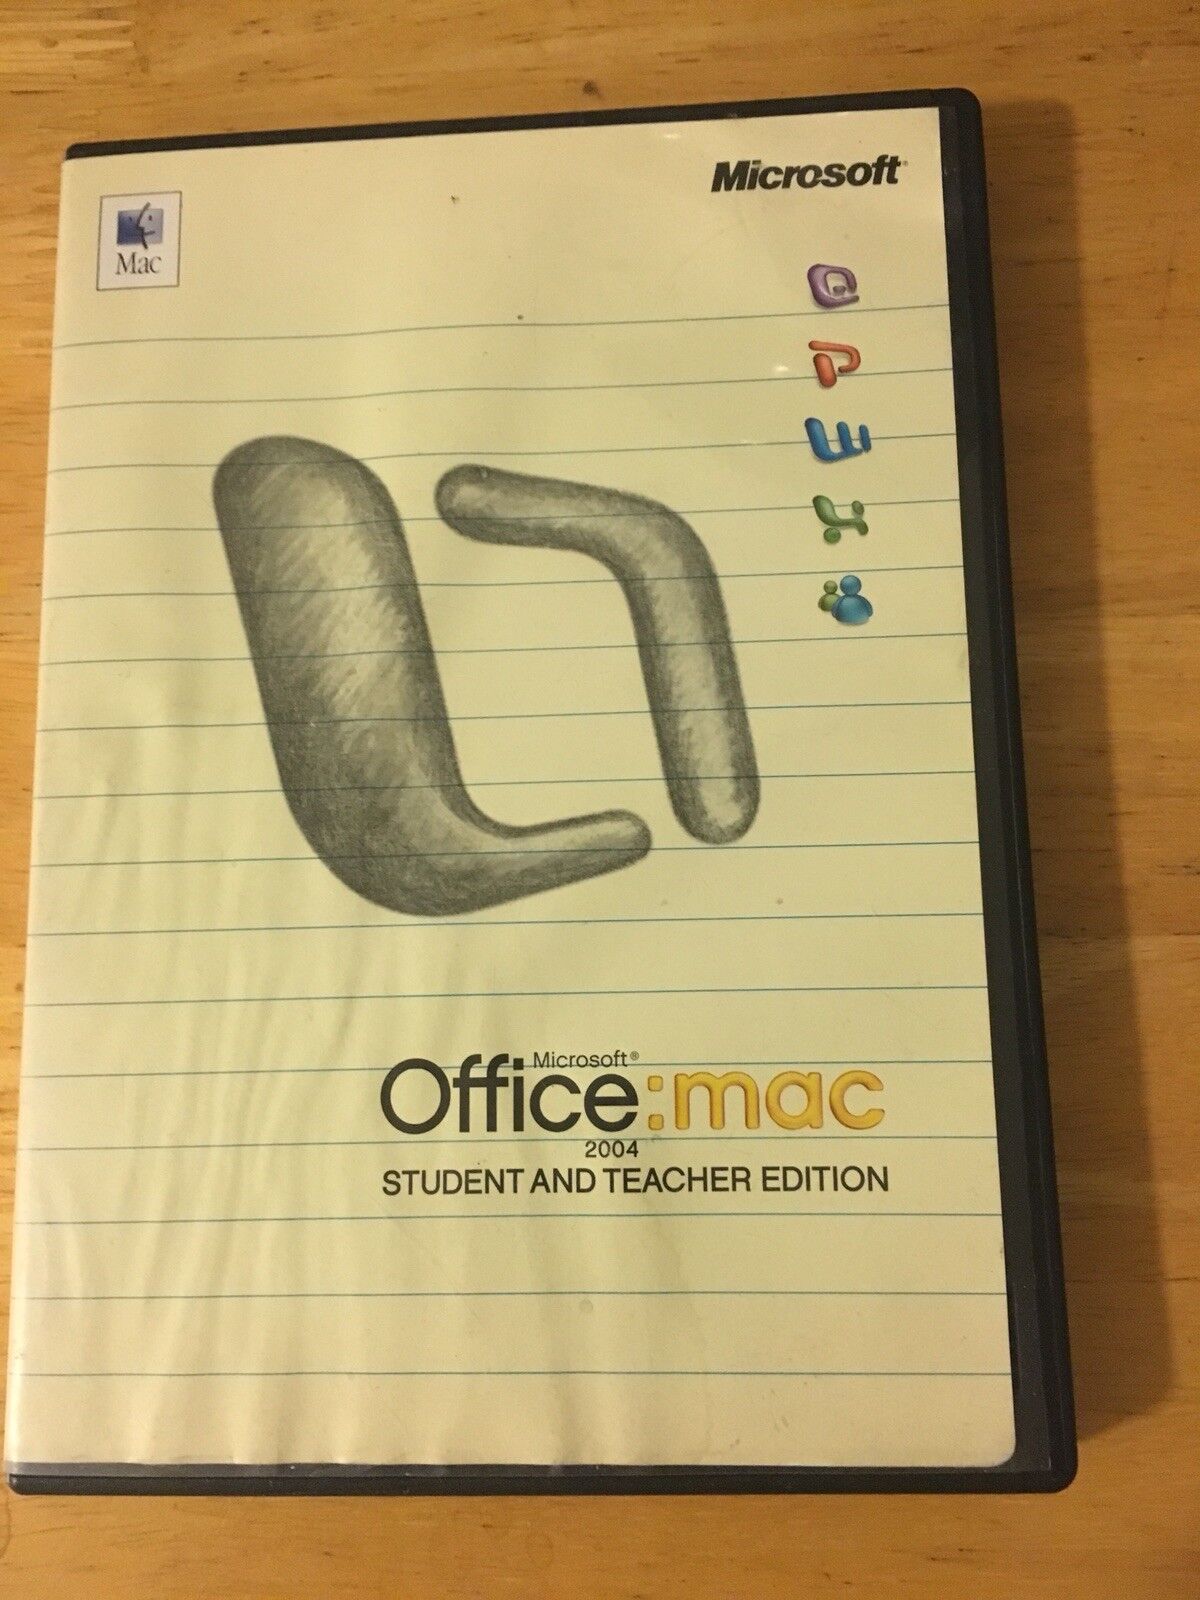 Microsoft Office 2004 Student and Teacher Edition for Mac for Windows, Mac